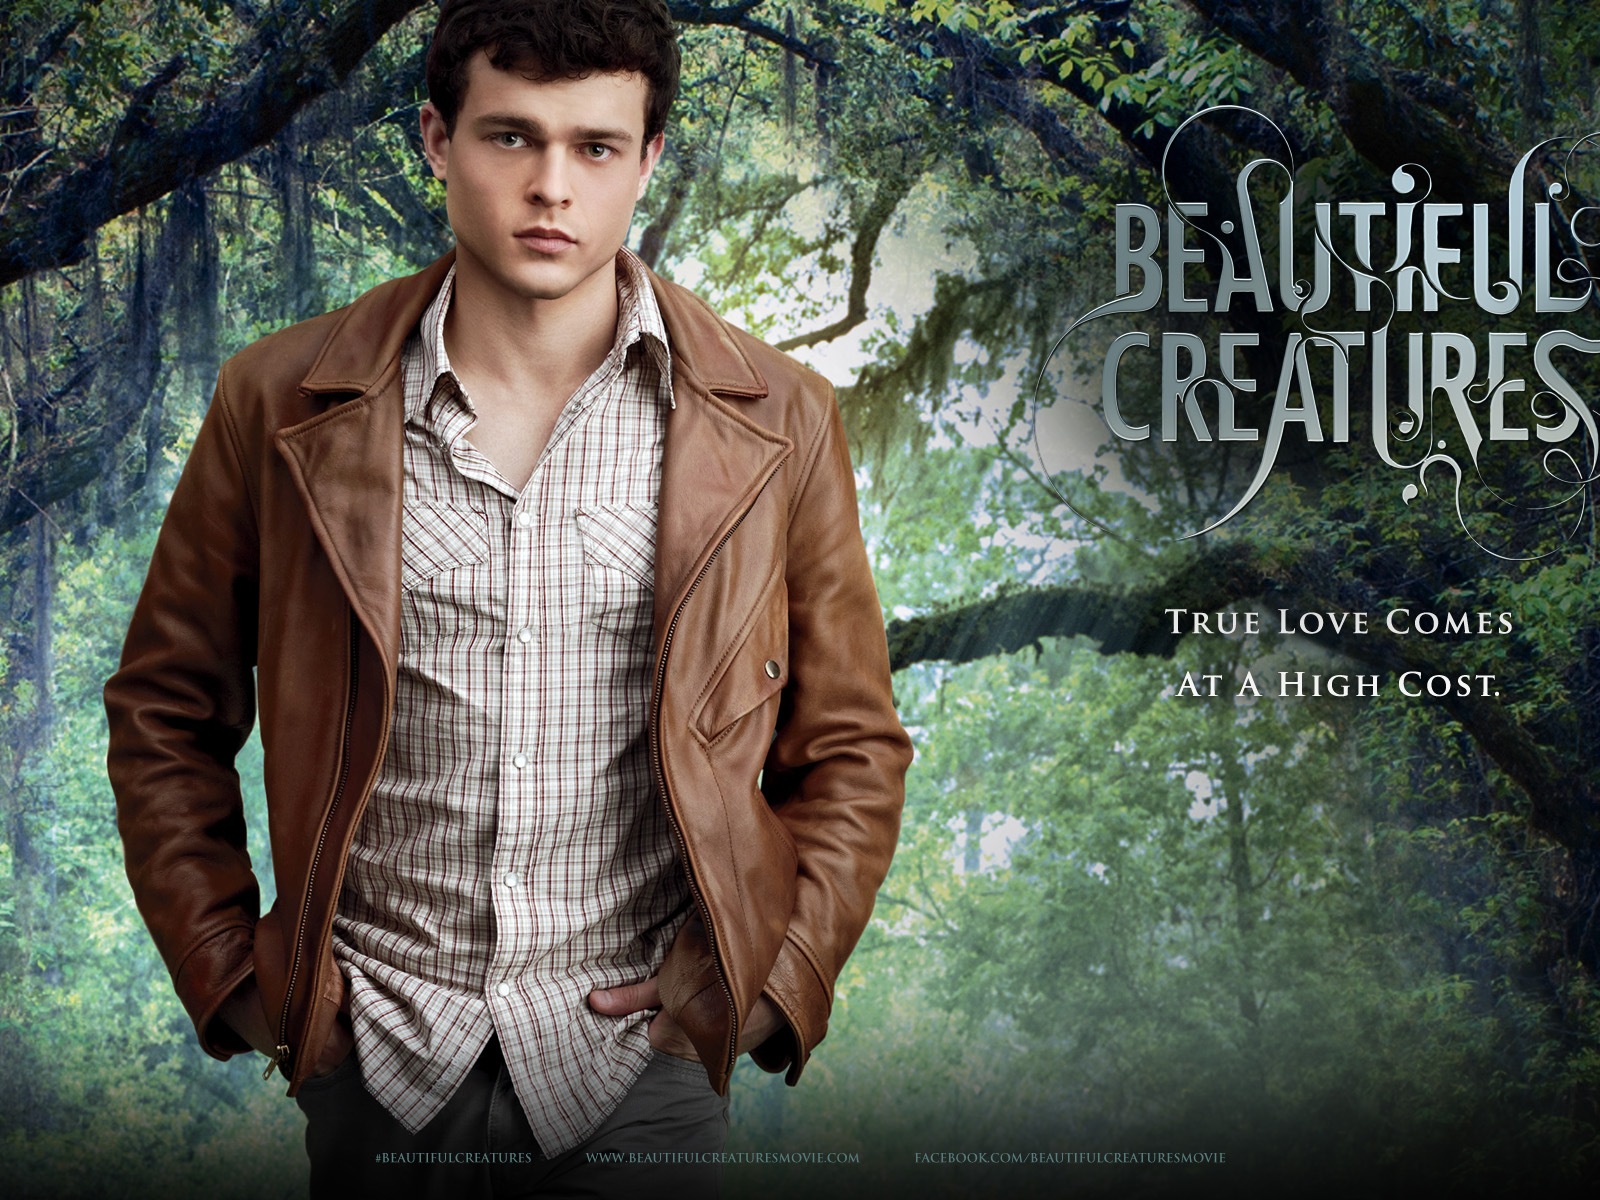 Beautiful Creatures 2013 HD movie wallpapers #5 - 1600x1200